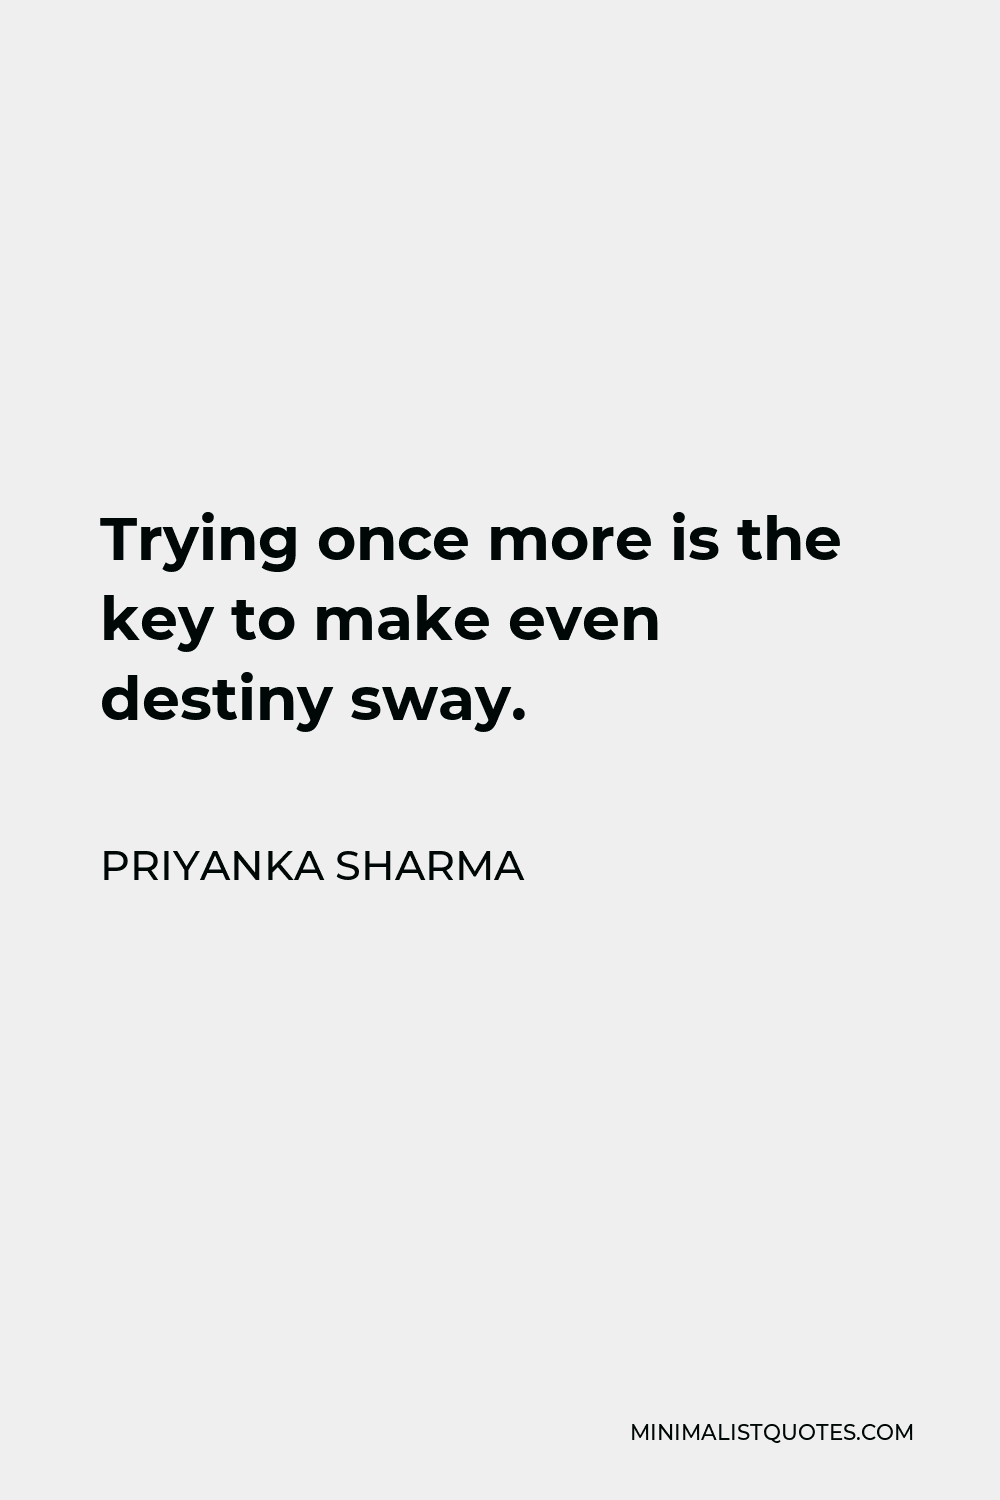 Priyanka Sharma Quote - Trying once more is the key to make even destiny sway.